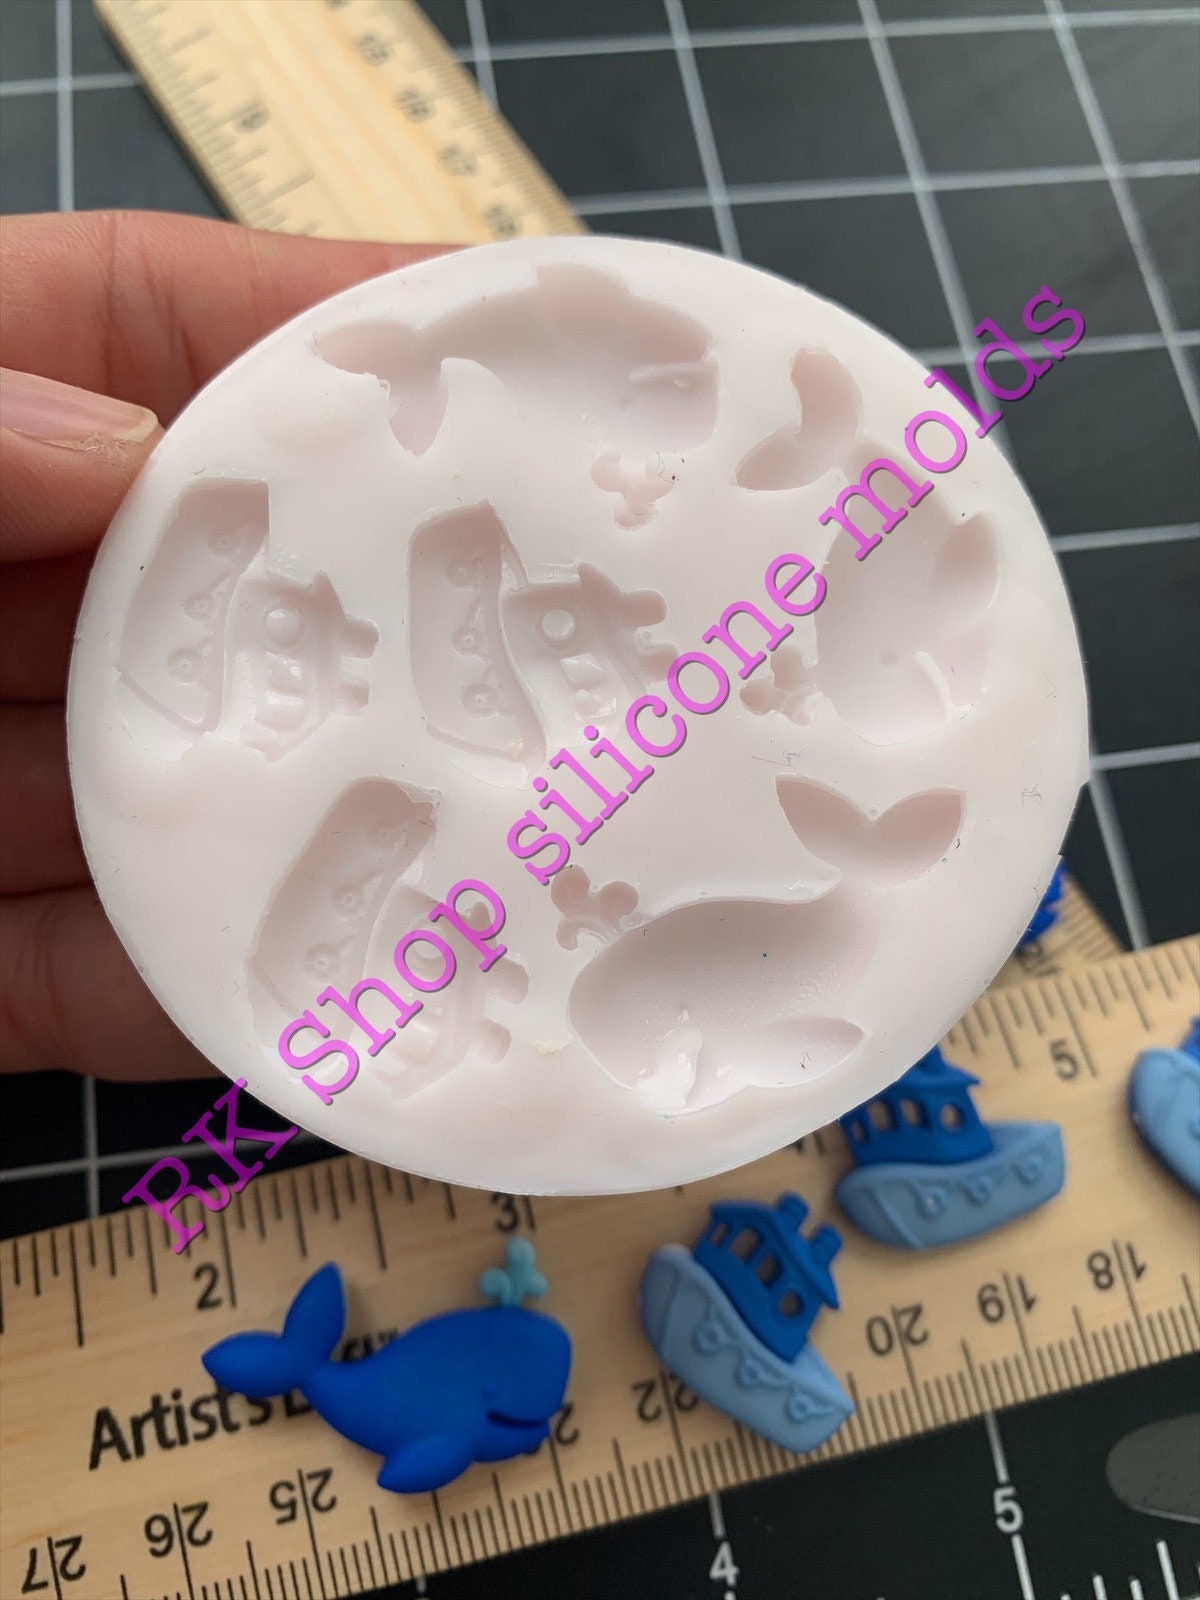 Sea Snail Mousse Silicone Mold Fondant Cake Border Mould Chocolate Mould  Cake Decor Tools Kitchen Baking Accessories Baking Molds Silicone Shapes